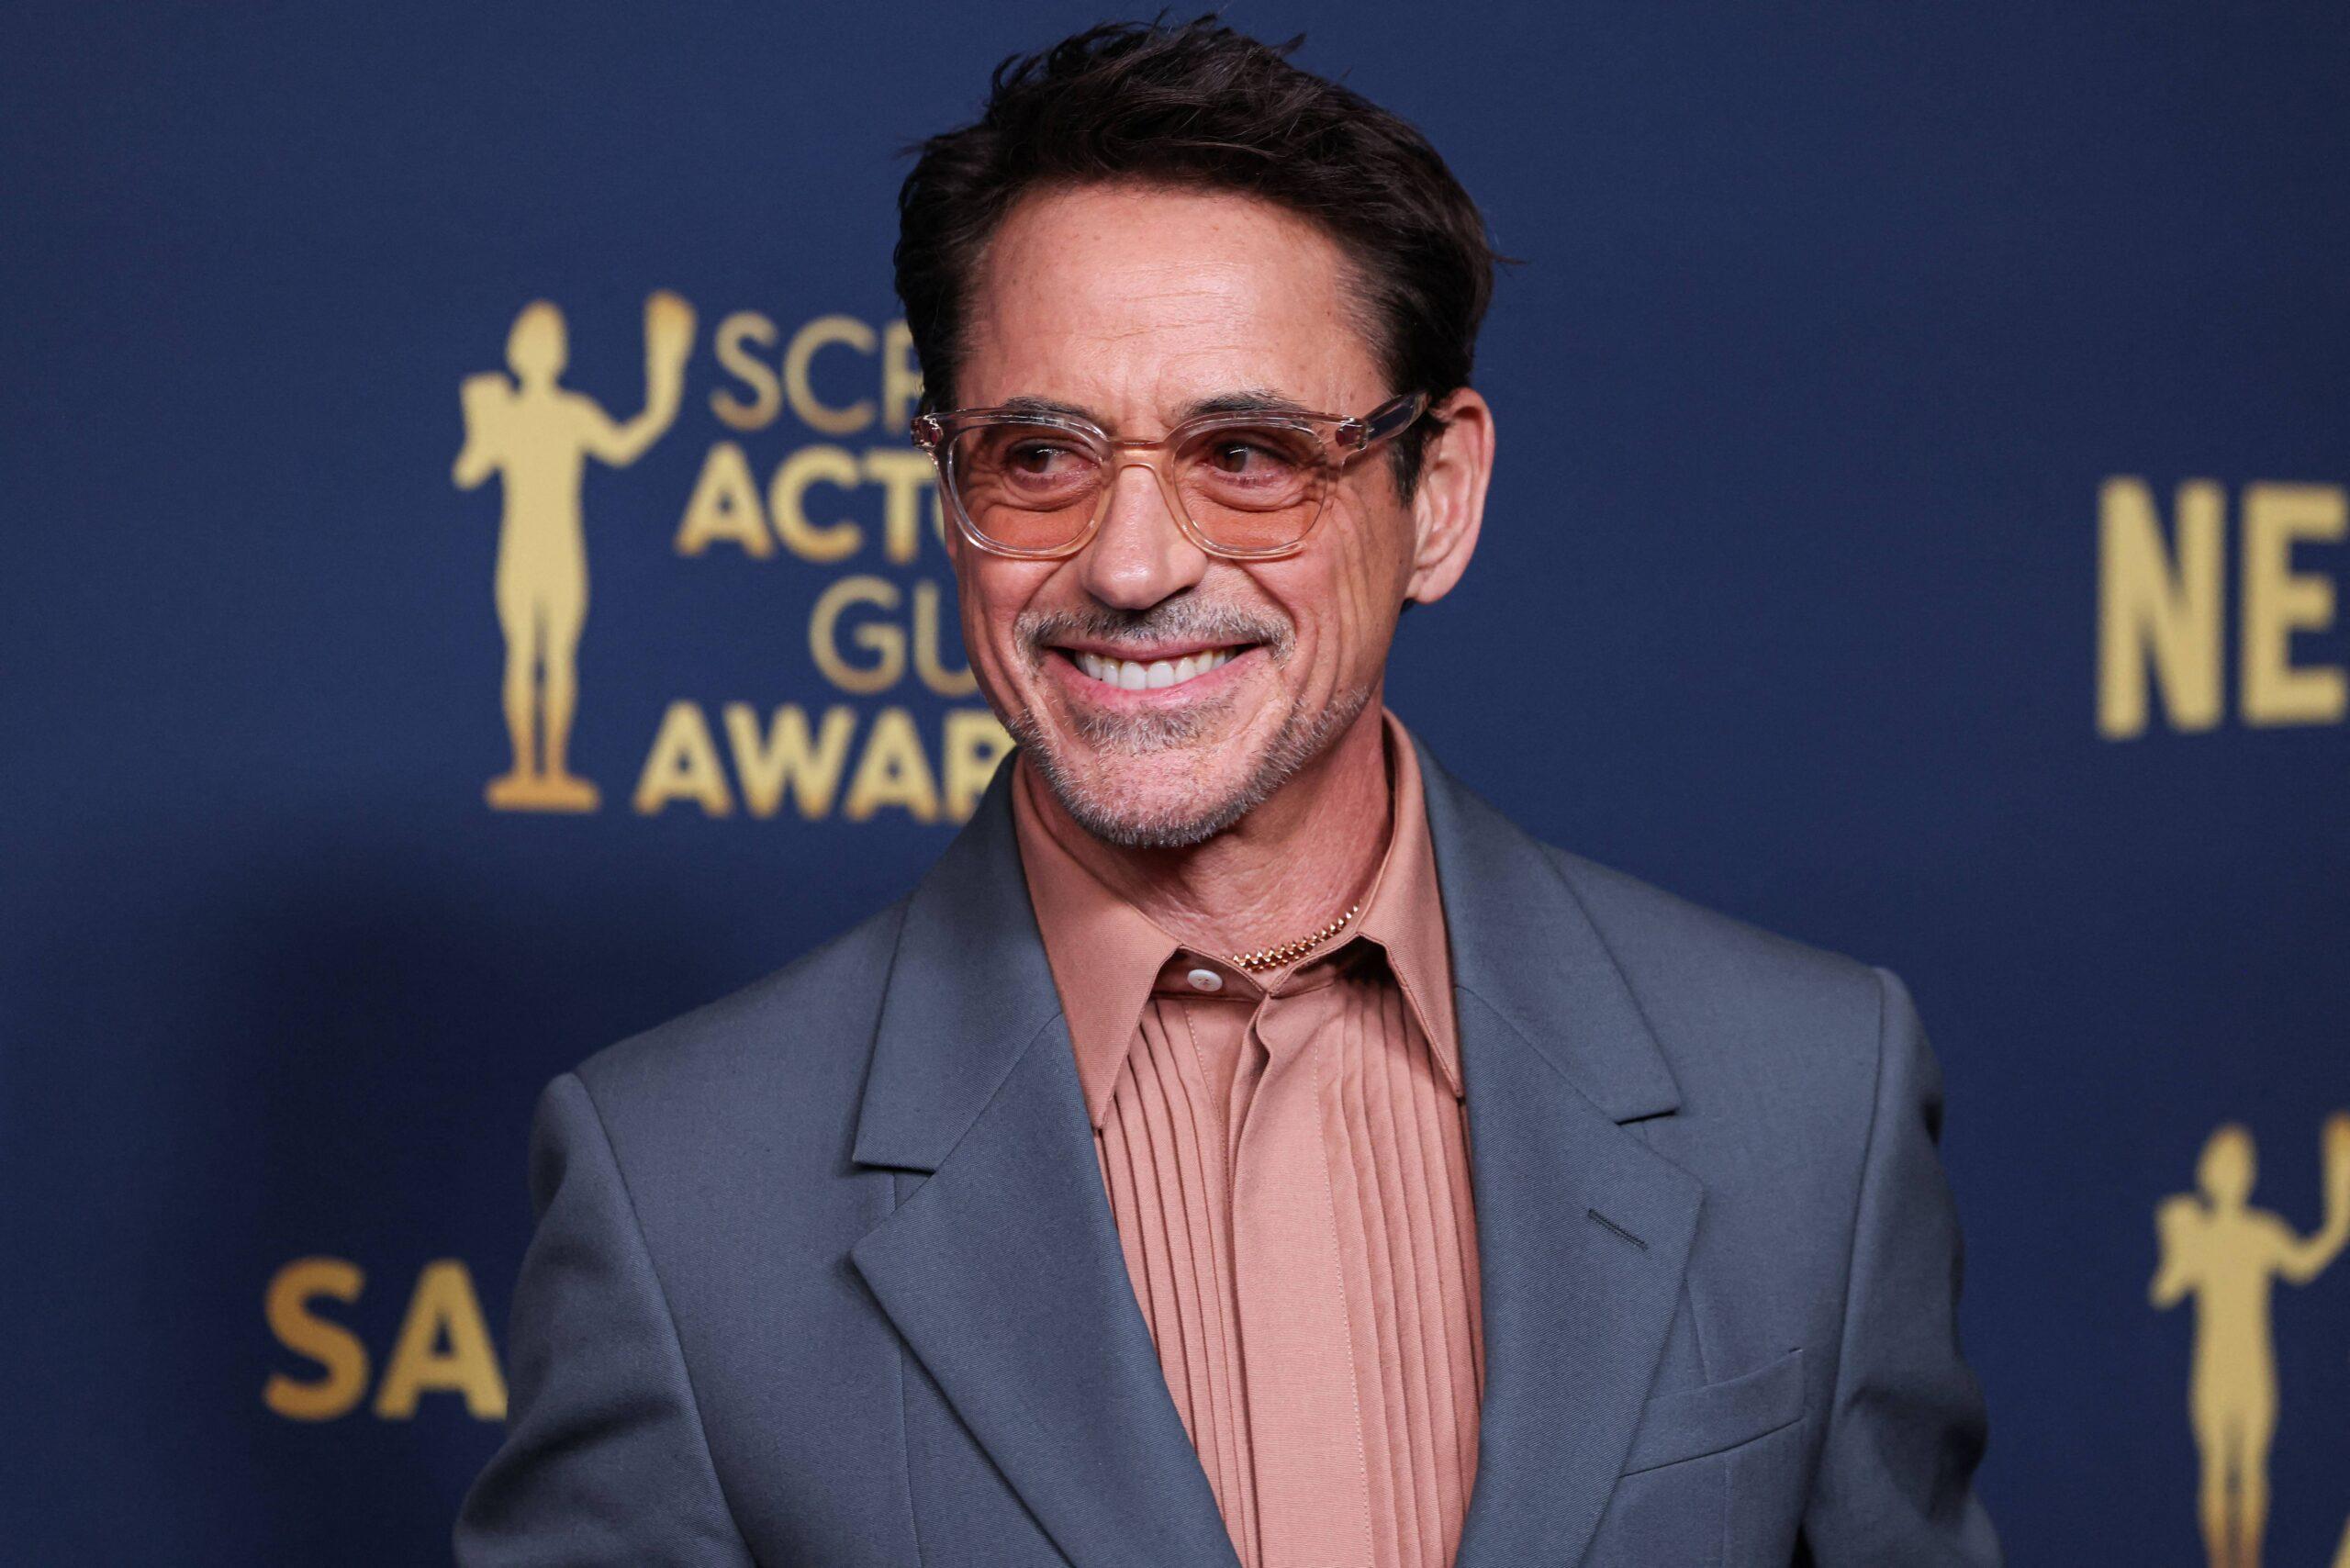 Robert Downey Jr. Makes Oscars History With His First Win!